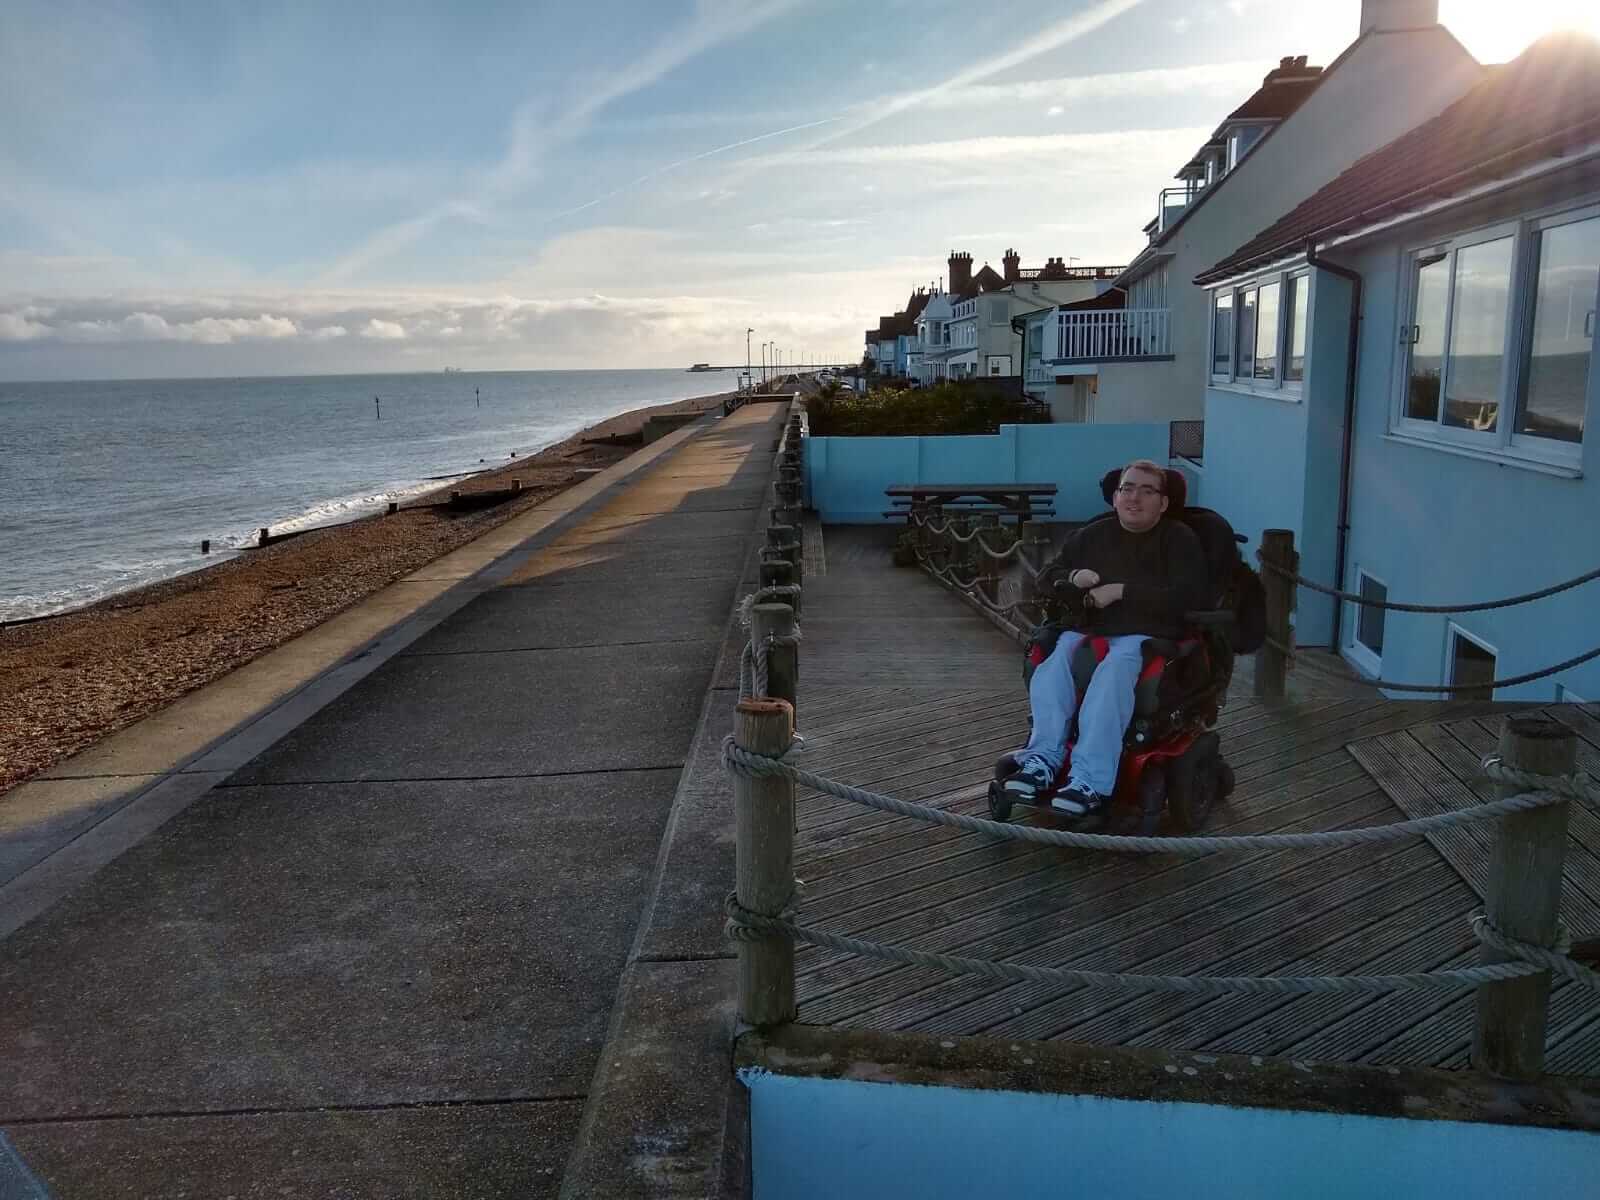 Alex sitting in his powered wheelchair on the cottage decking admiring the view of the beach.